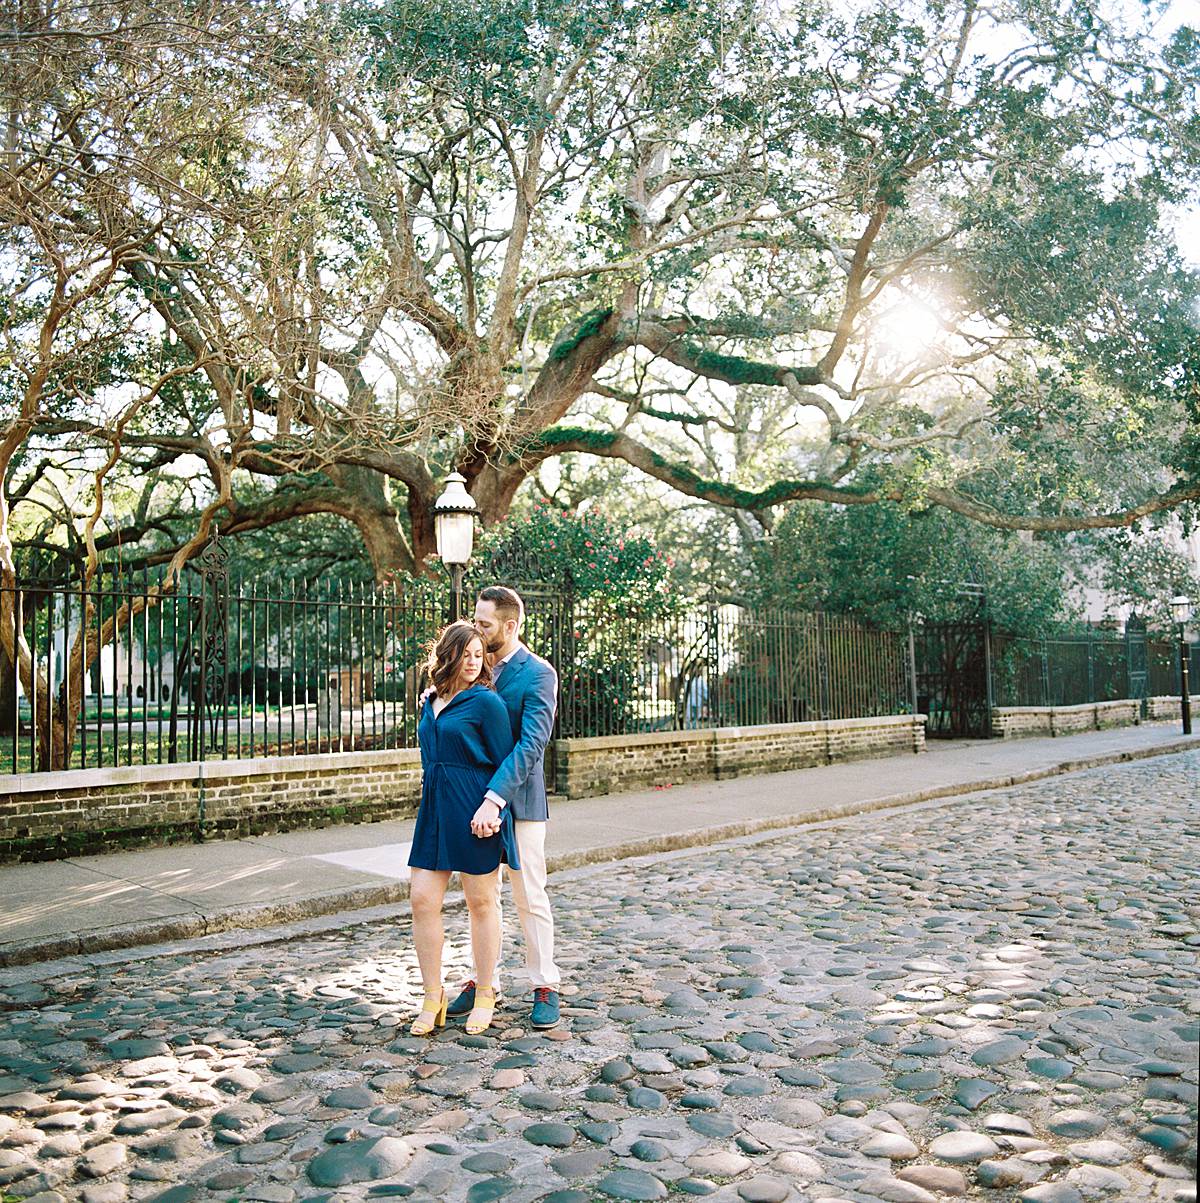 hasselblad FE 50mm f2.8 engagement portrait from hasselblad 202fa on chalmers st in charleston sc